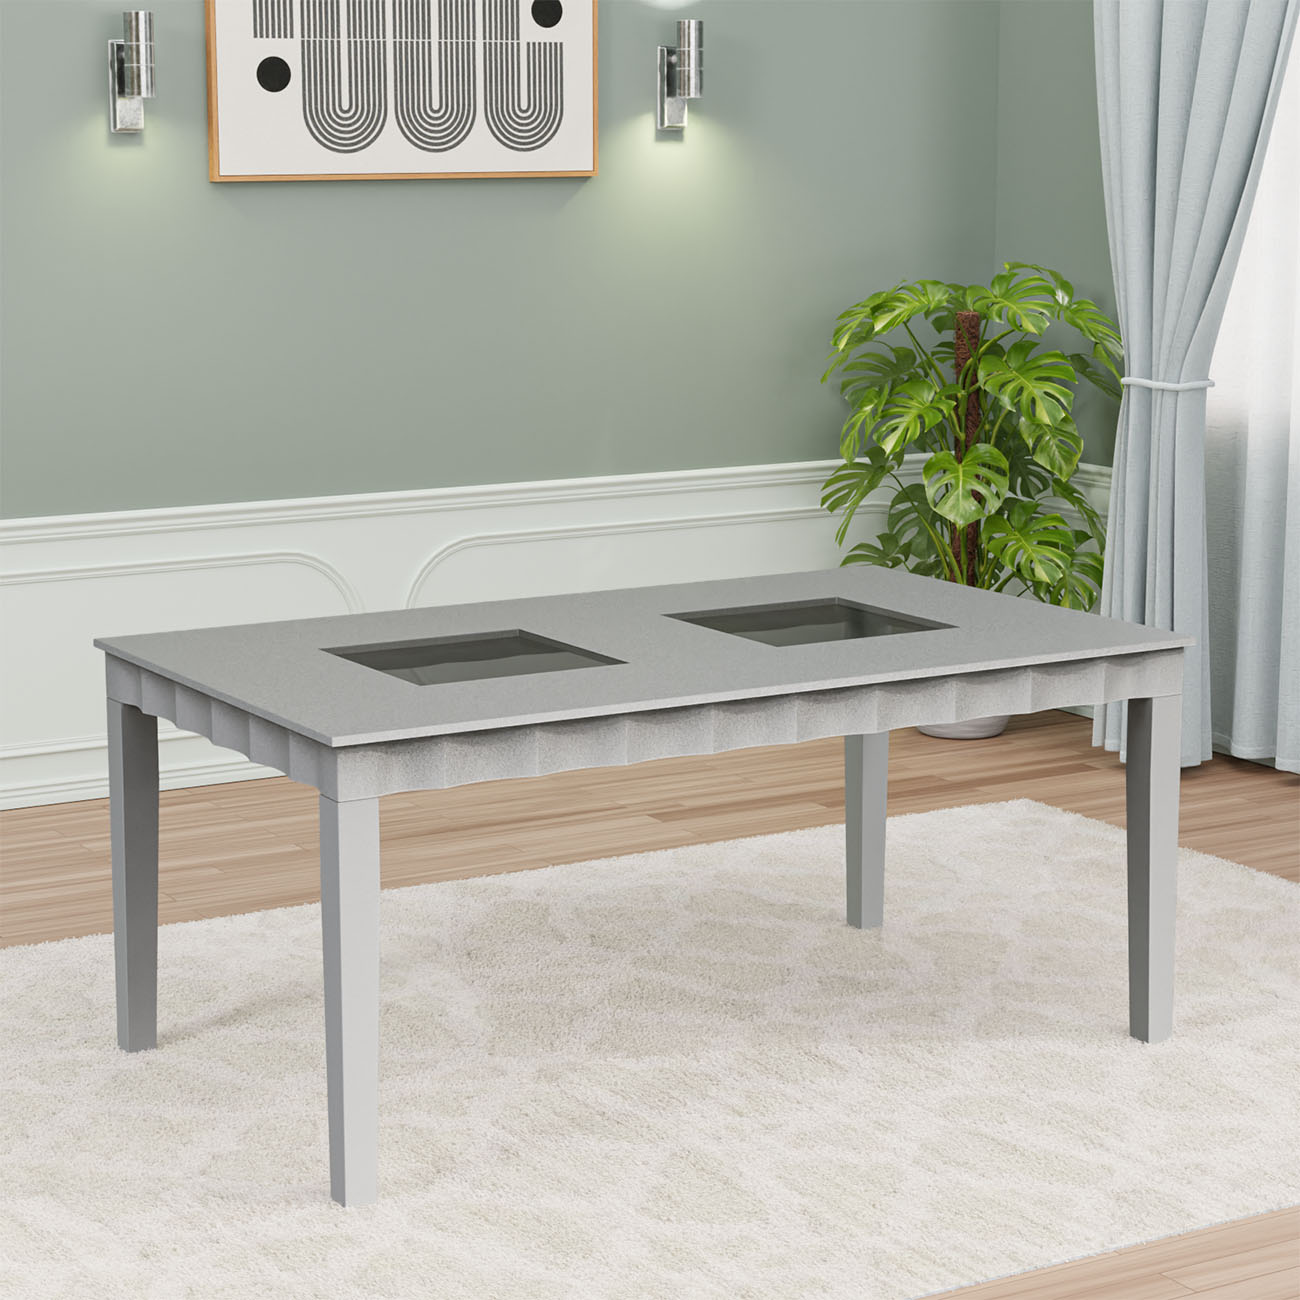 Merlin 6 Seater Dining Table (Metallic Silver)